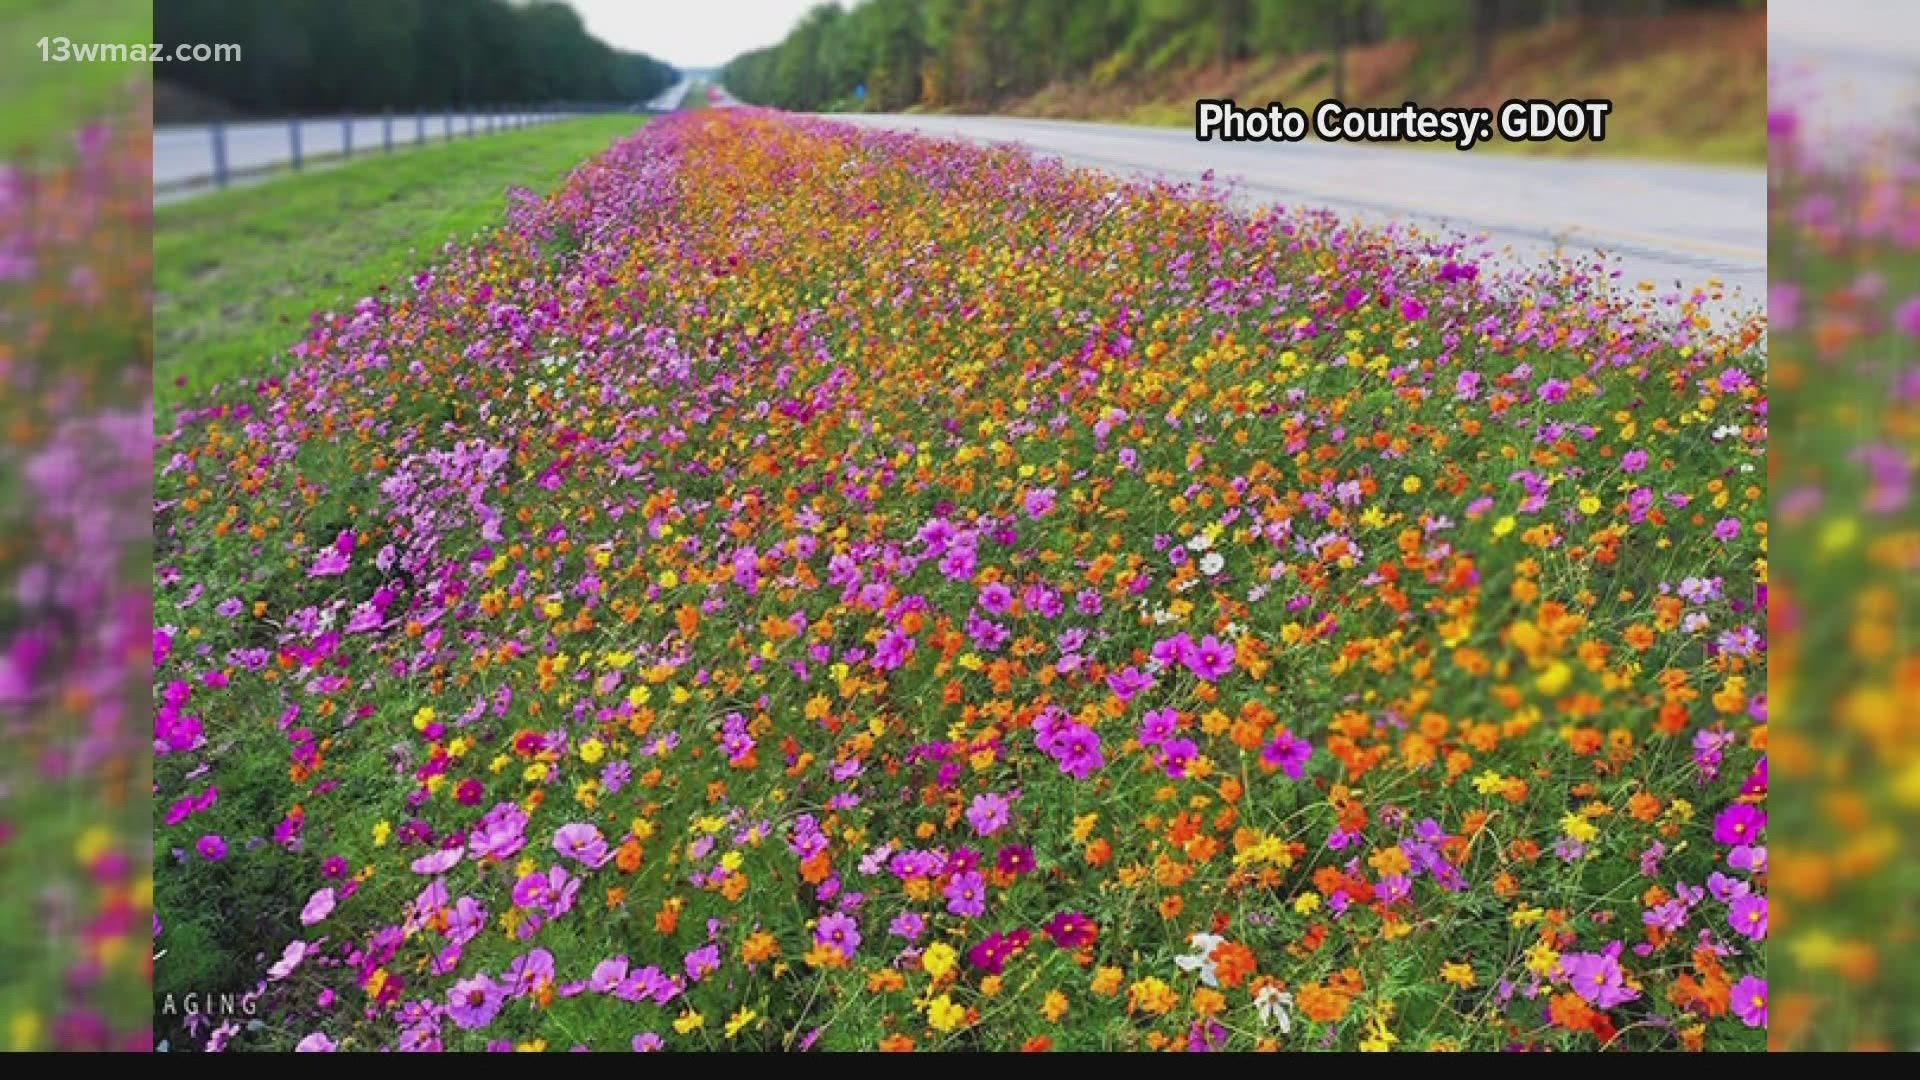 Wildflowers do best where there is plenty of sunlight and well-draining soil, which makes Georgia’s hundreds of miles of highway medians the perfect spot.